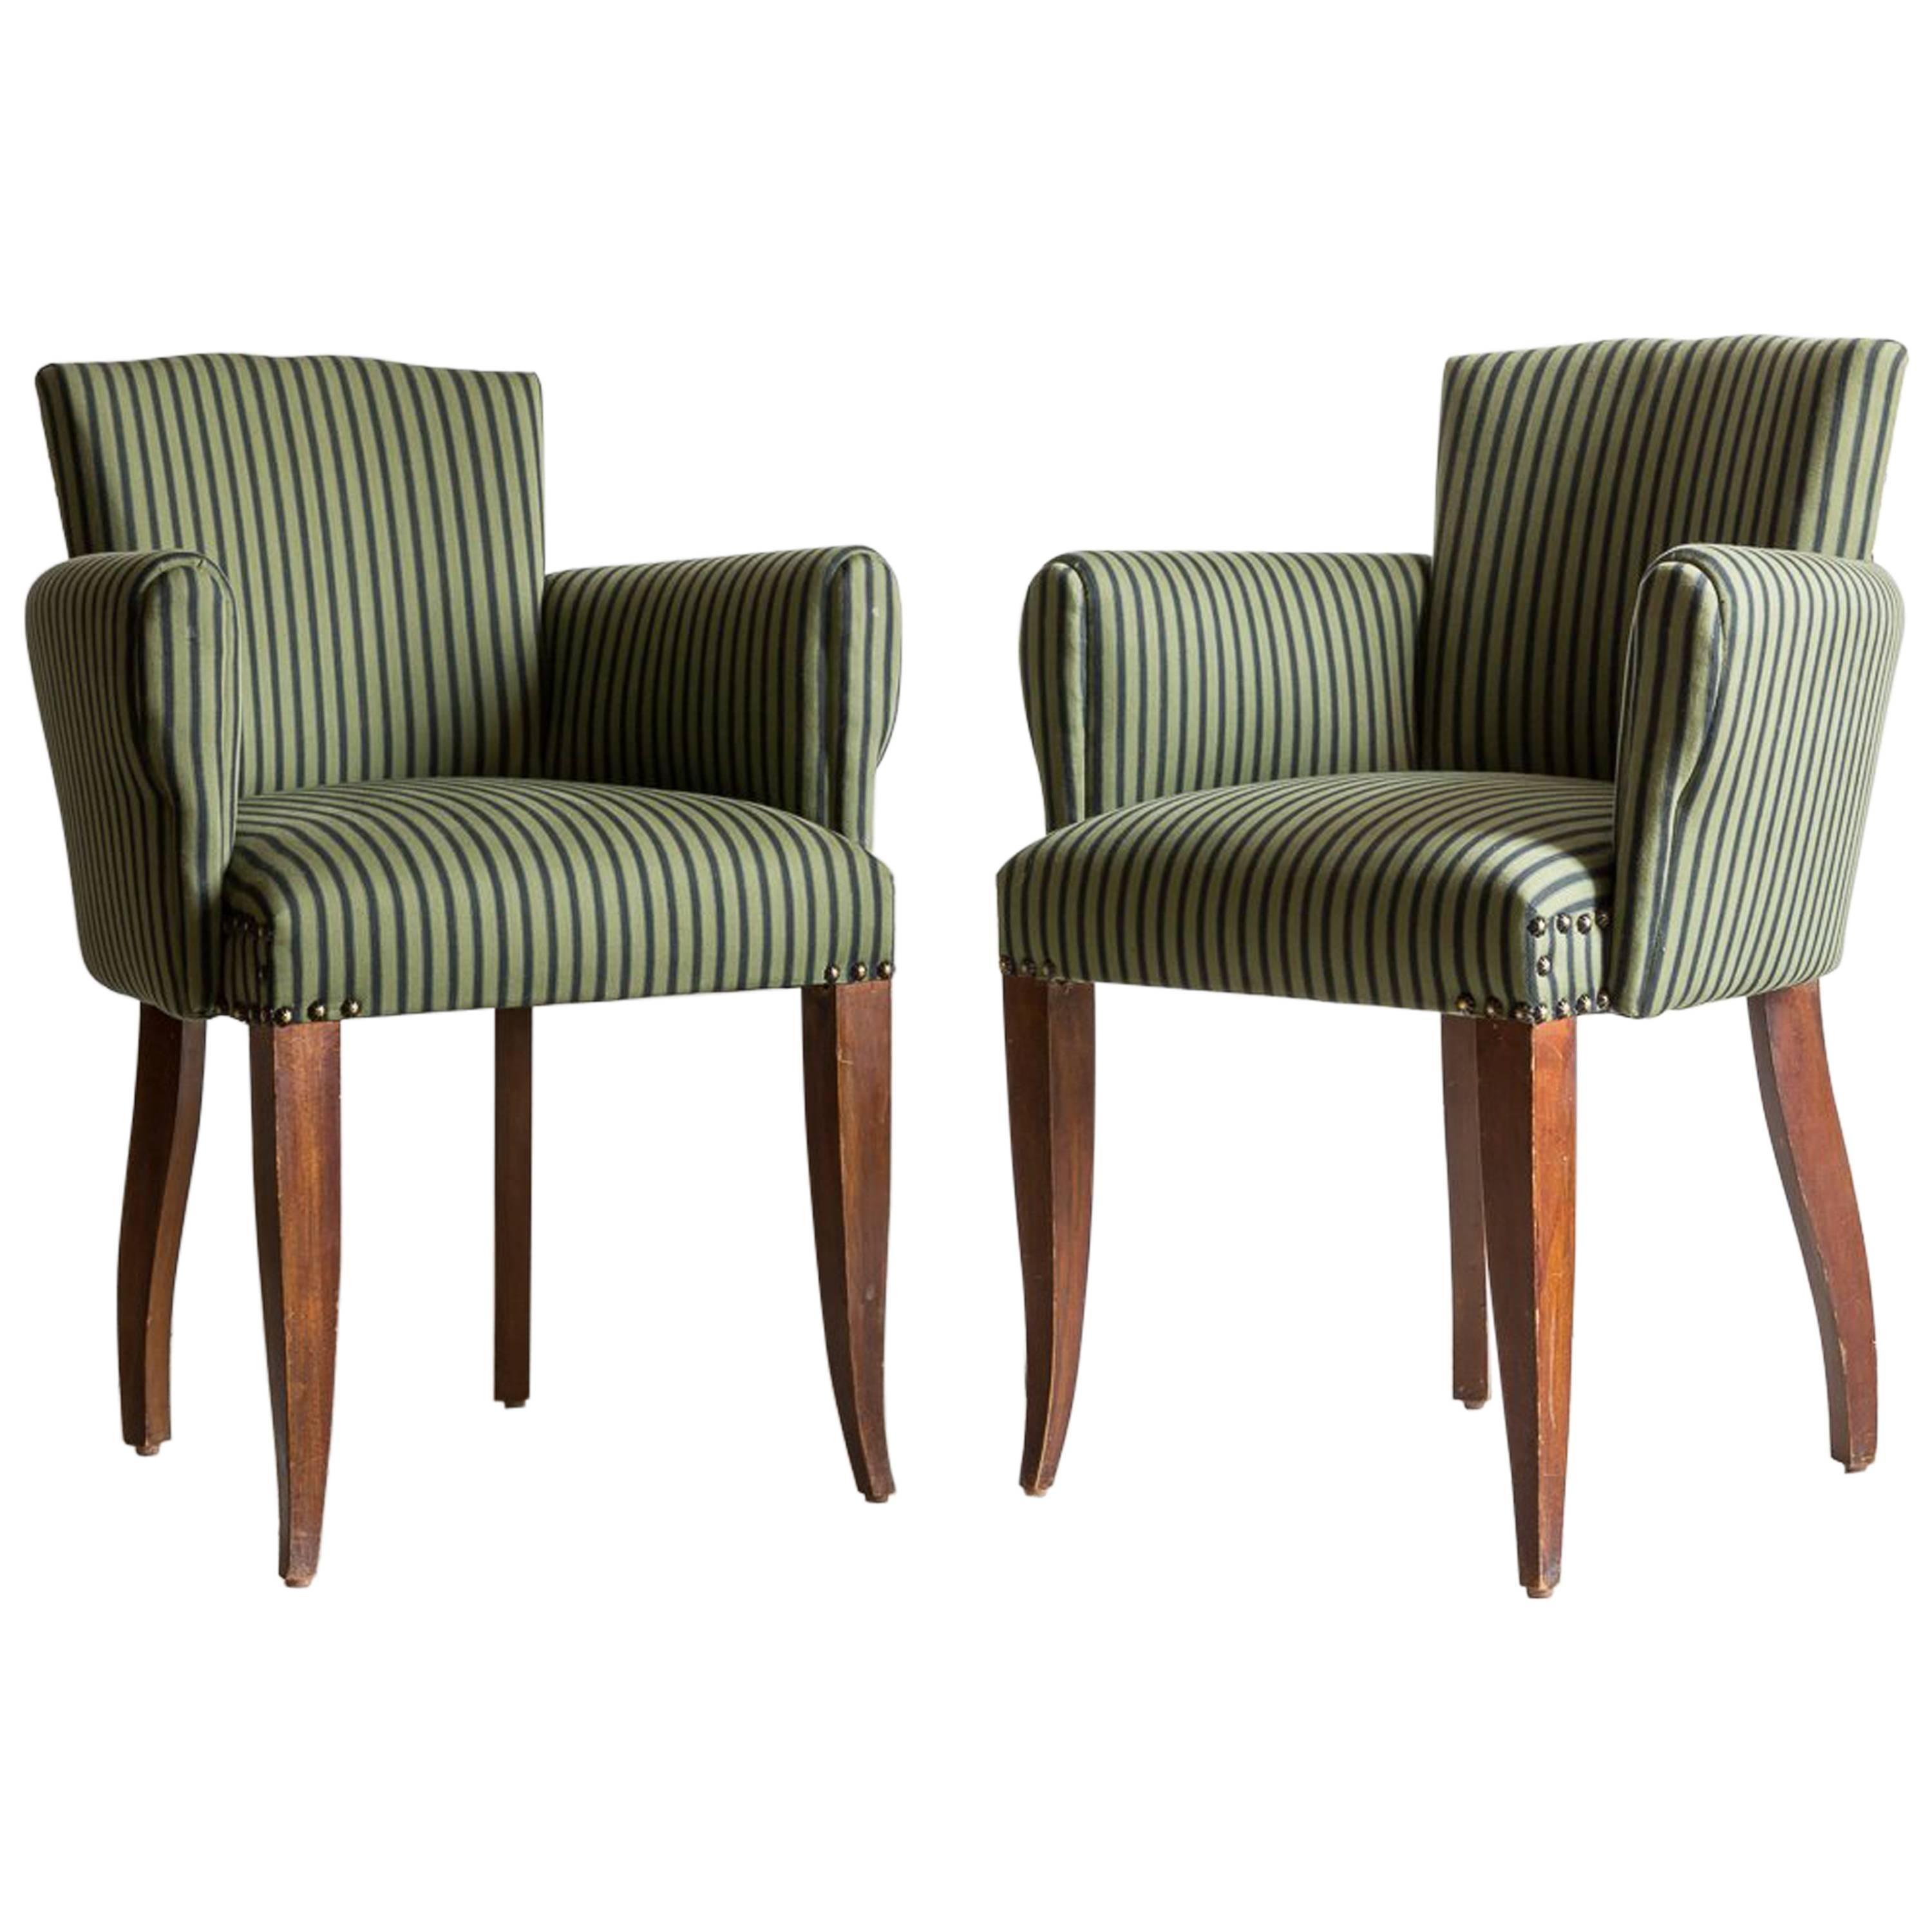 Pair of Captain Pull Up Chairs from Italy Upholstered in Howe Striped Fabric